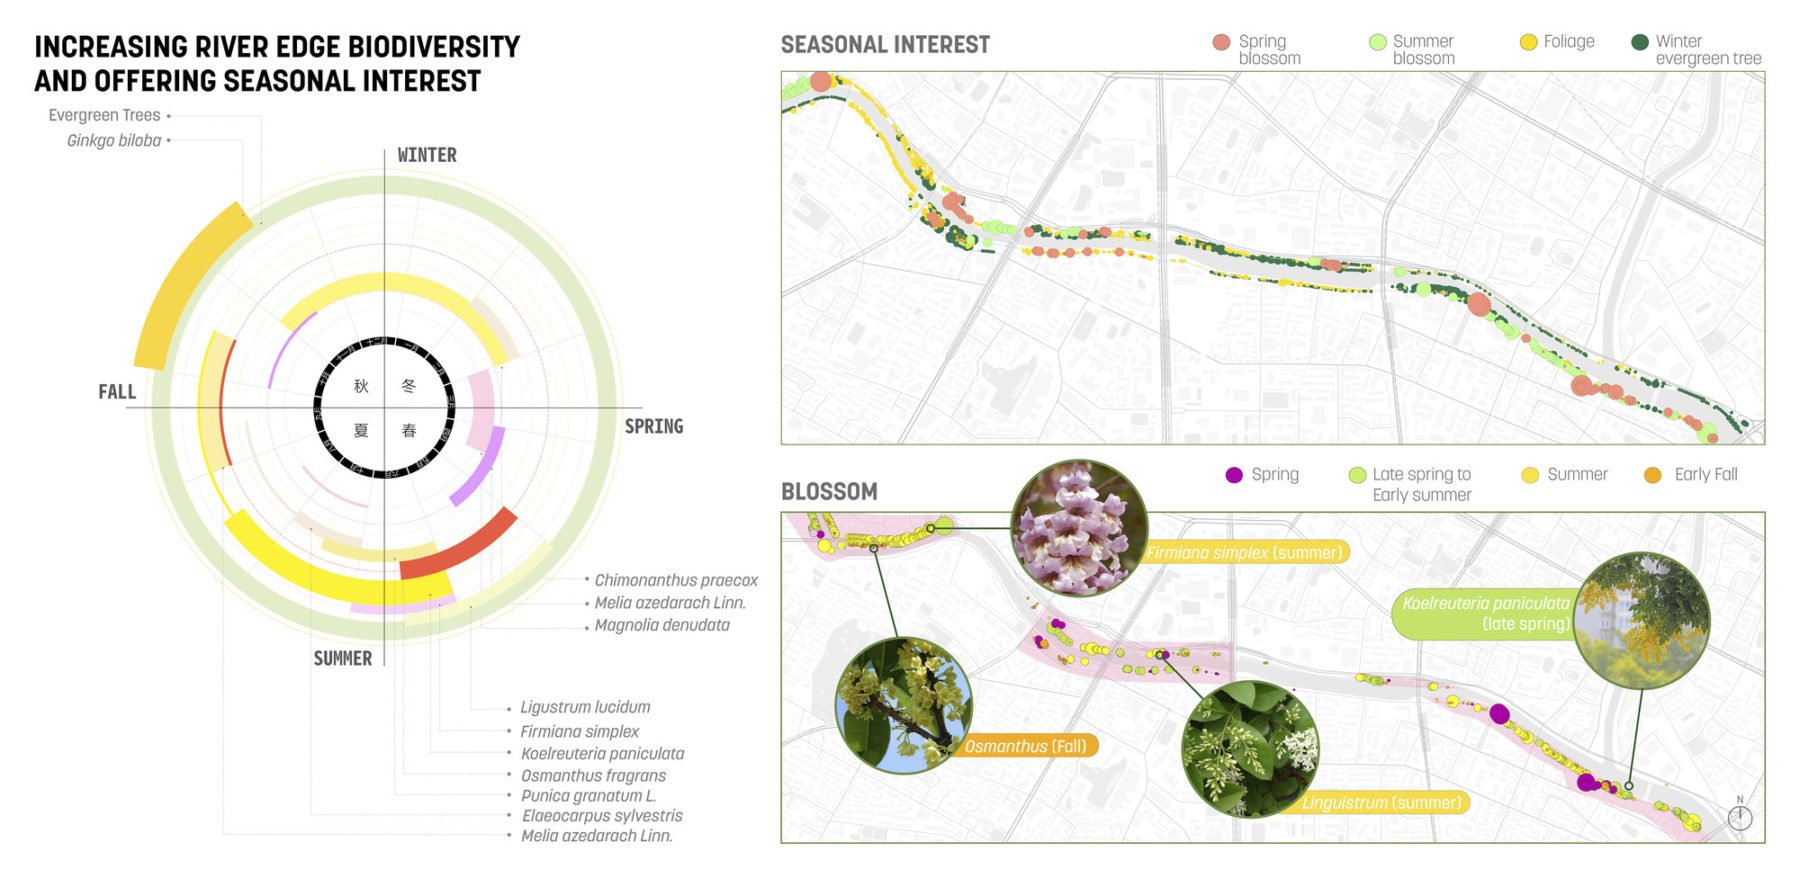 a composite image. the left side is a chart showing seasonal diversity of plantings. the left shows the seasonal bloom schedule across the plan. image title reads 